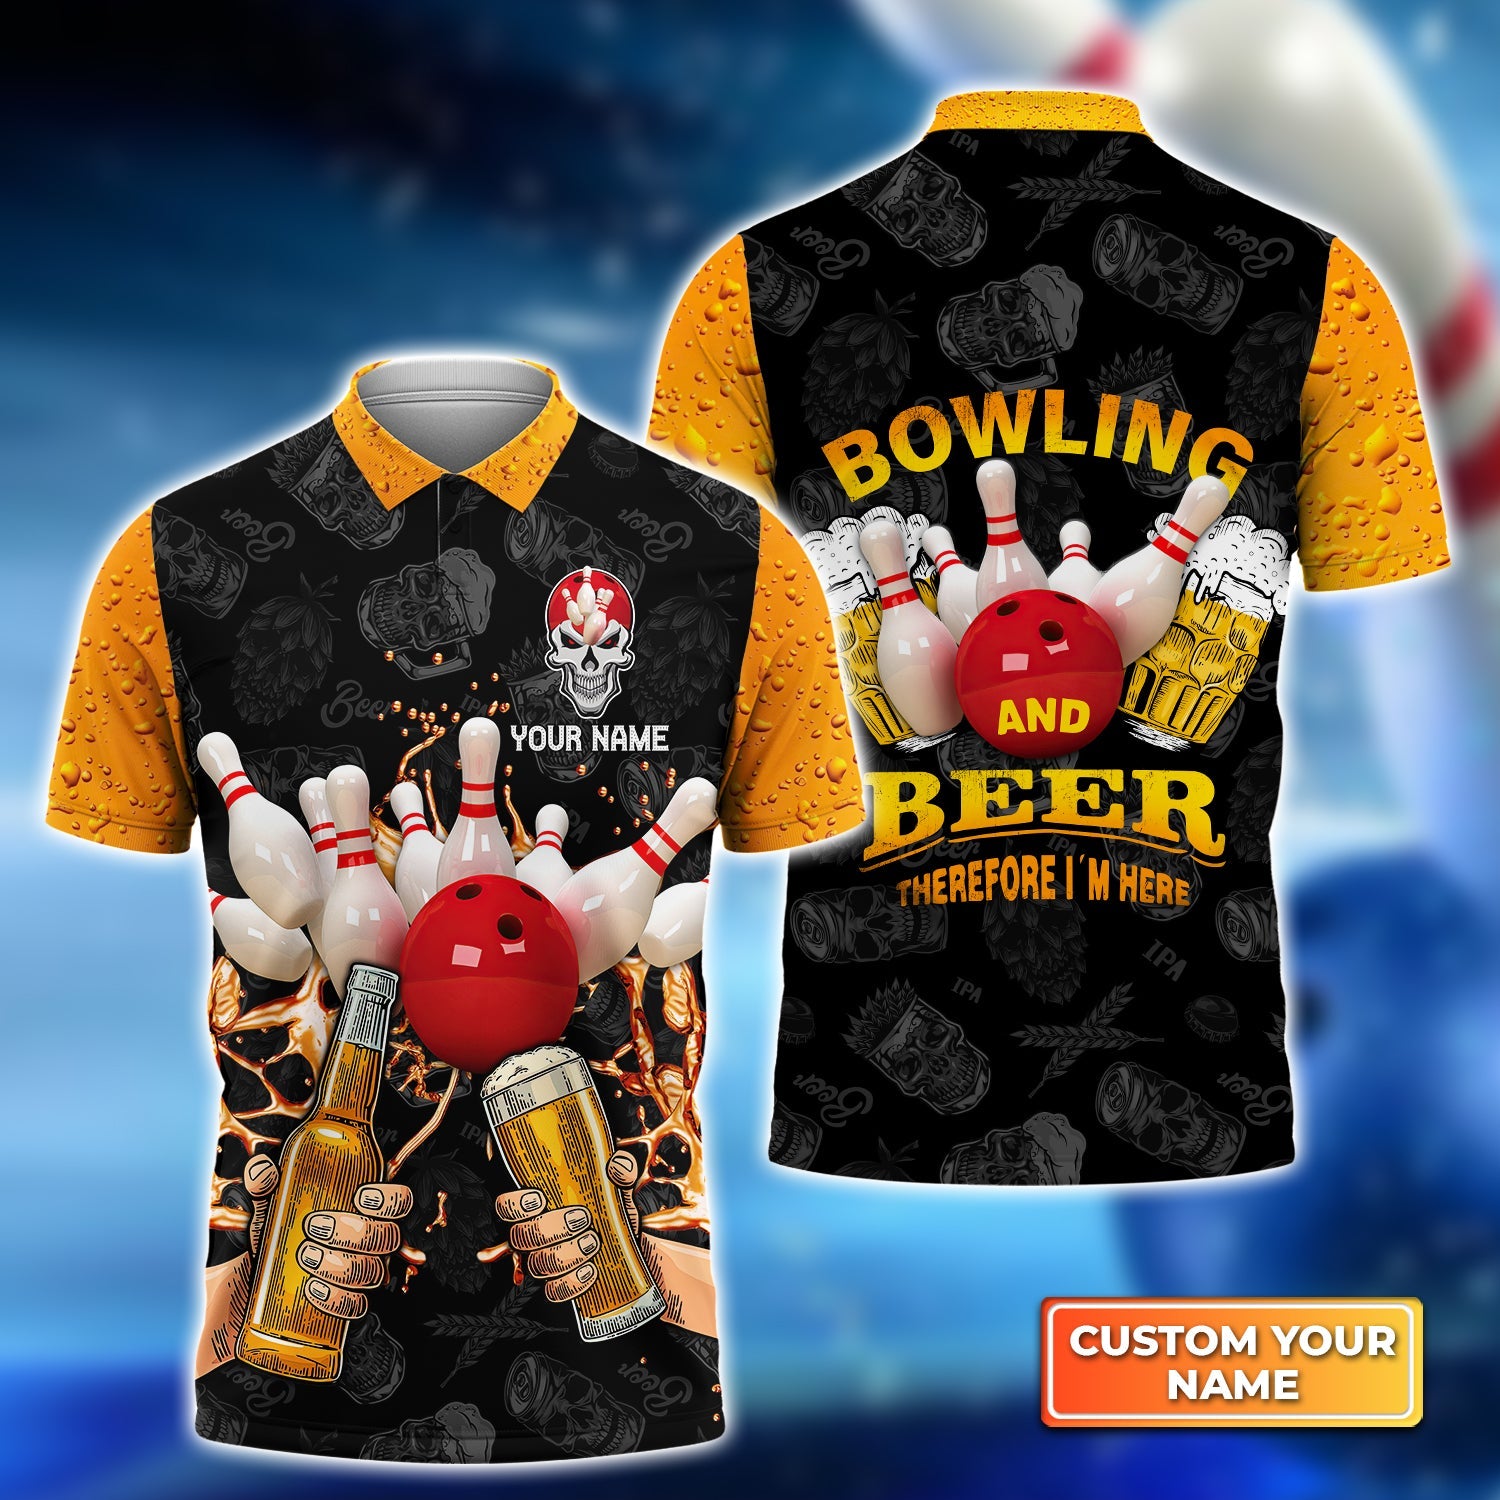 Bowling Custom Men Polo Shirt - Custom Name Bowling and Beer Therefore I'm Here Personalized Bowling Polo Shirt - Perfect Gift For Friend, Family